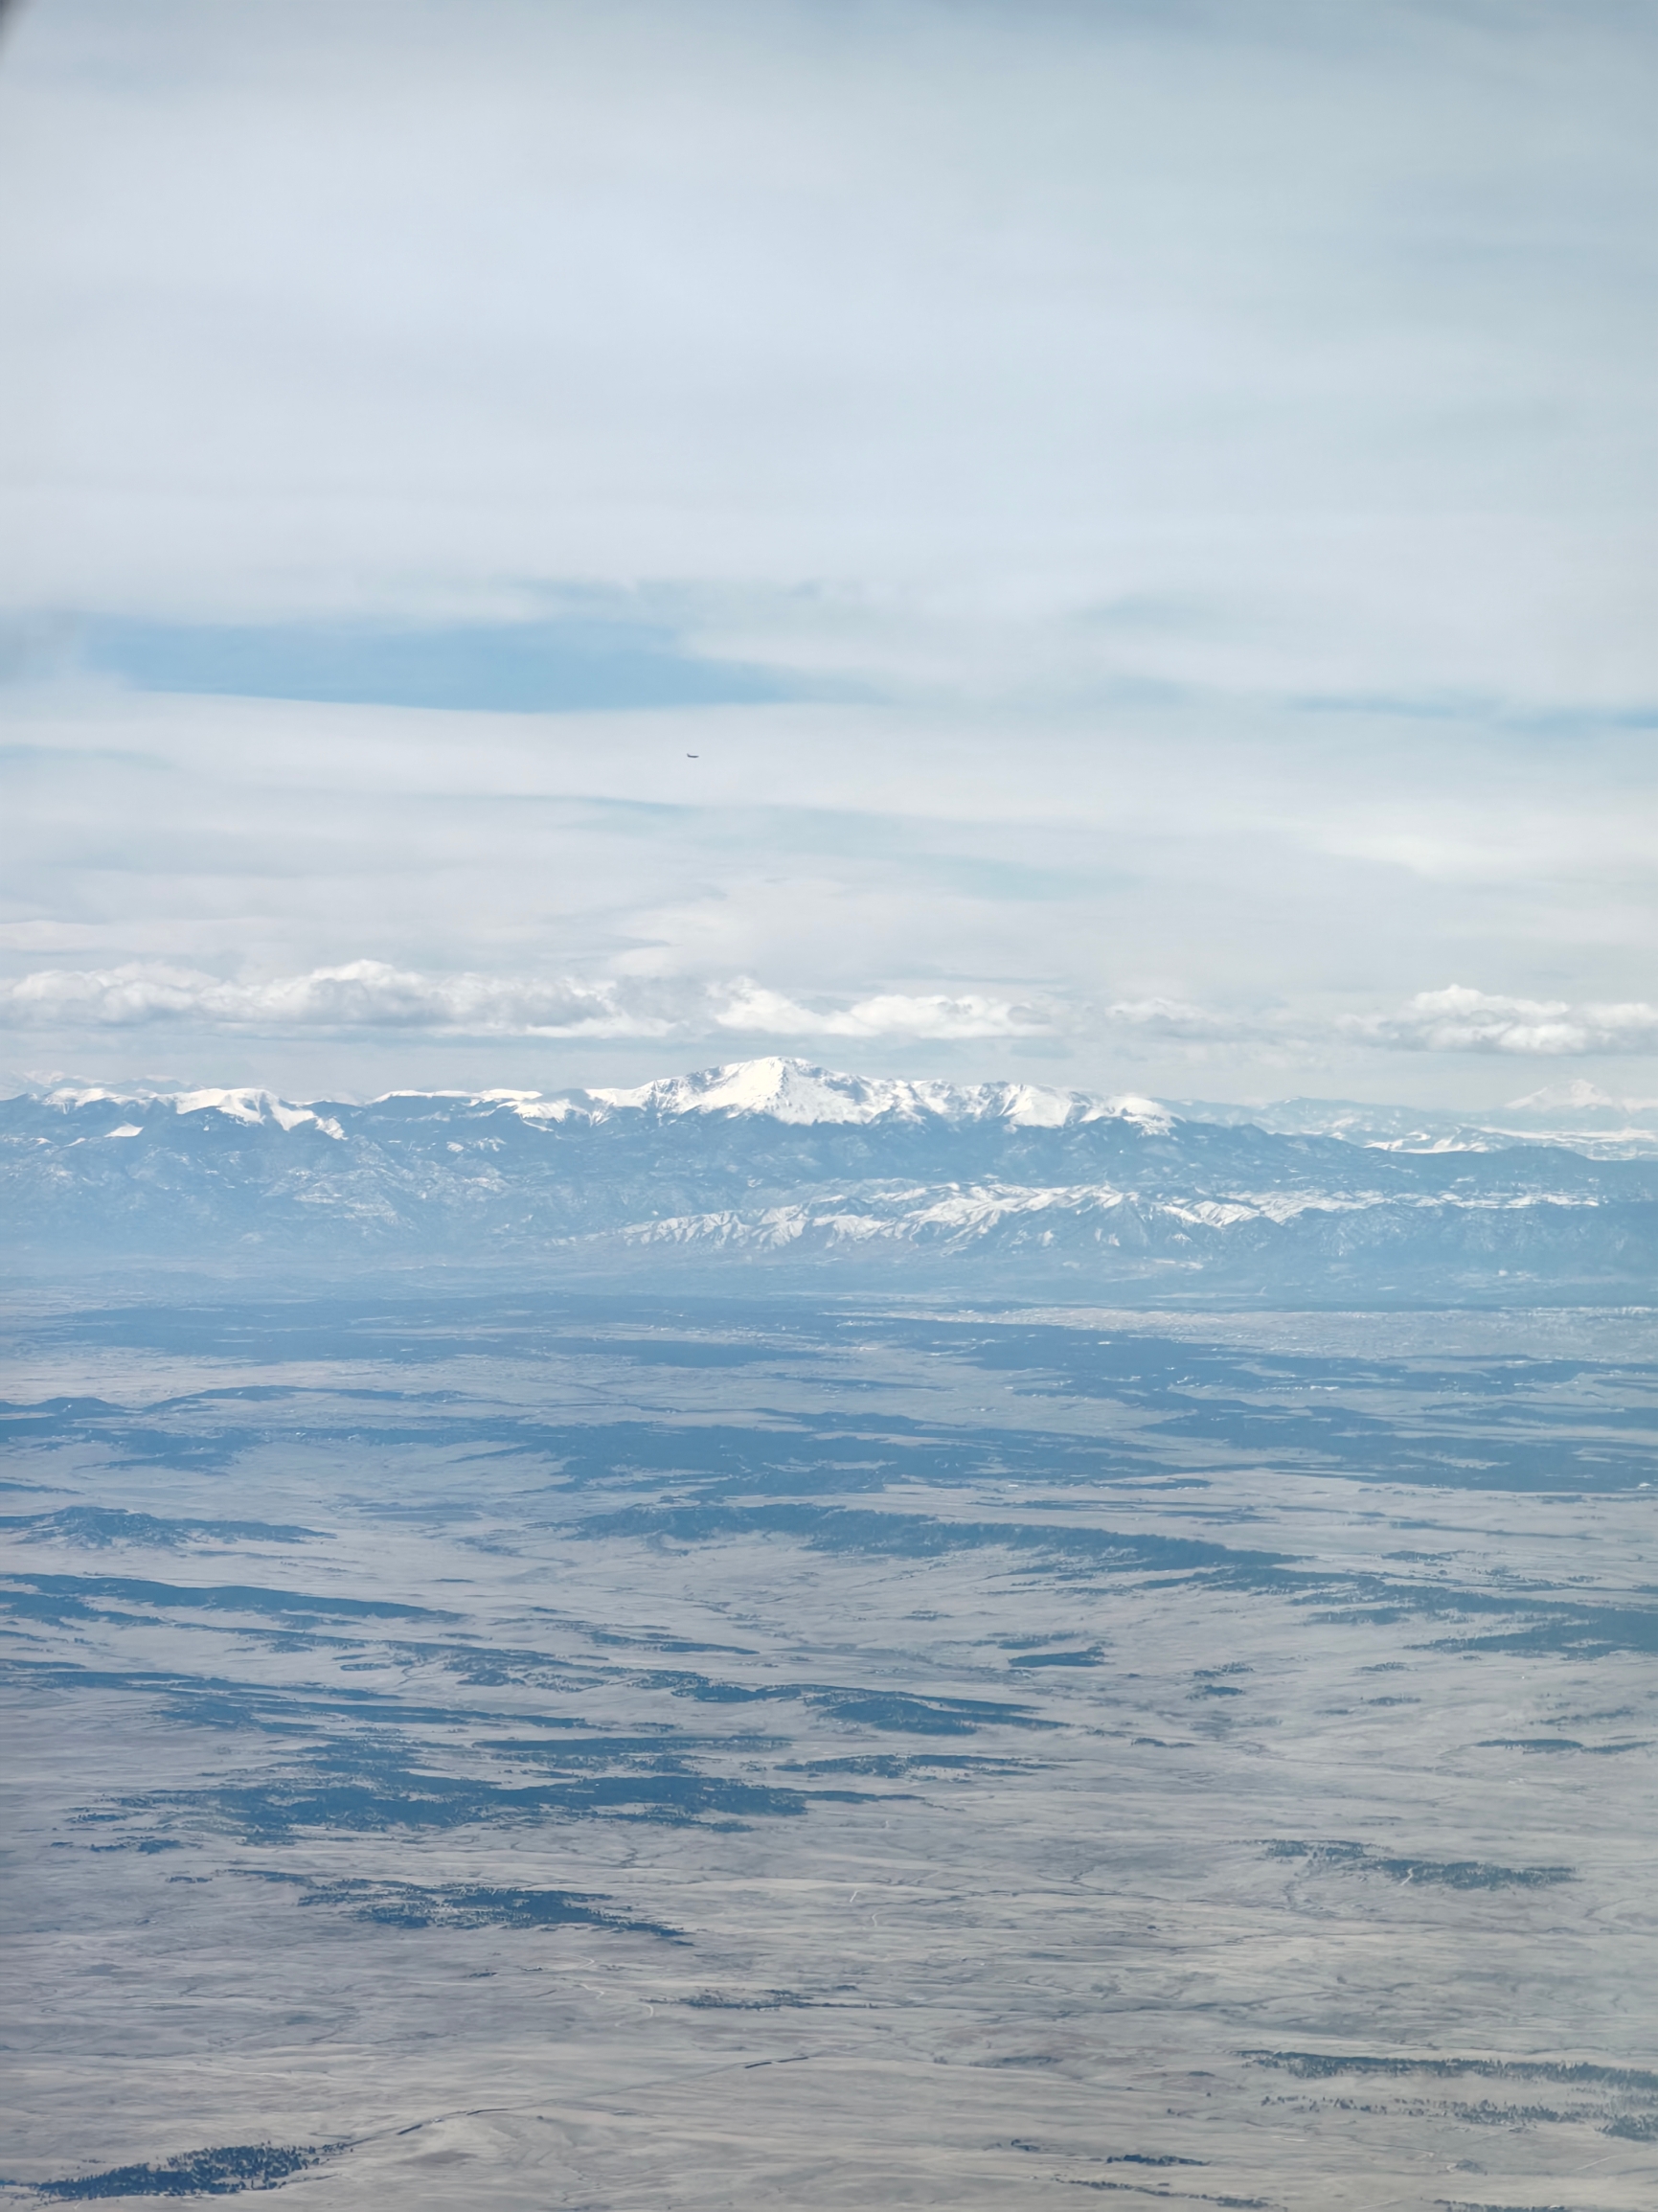 Denver, between the great plains and Rocky mountai